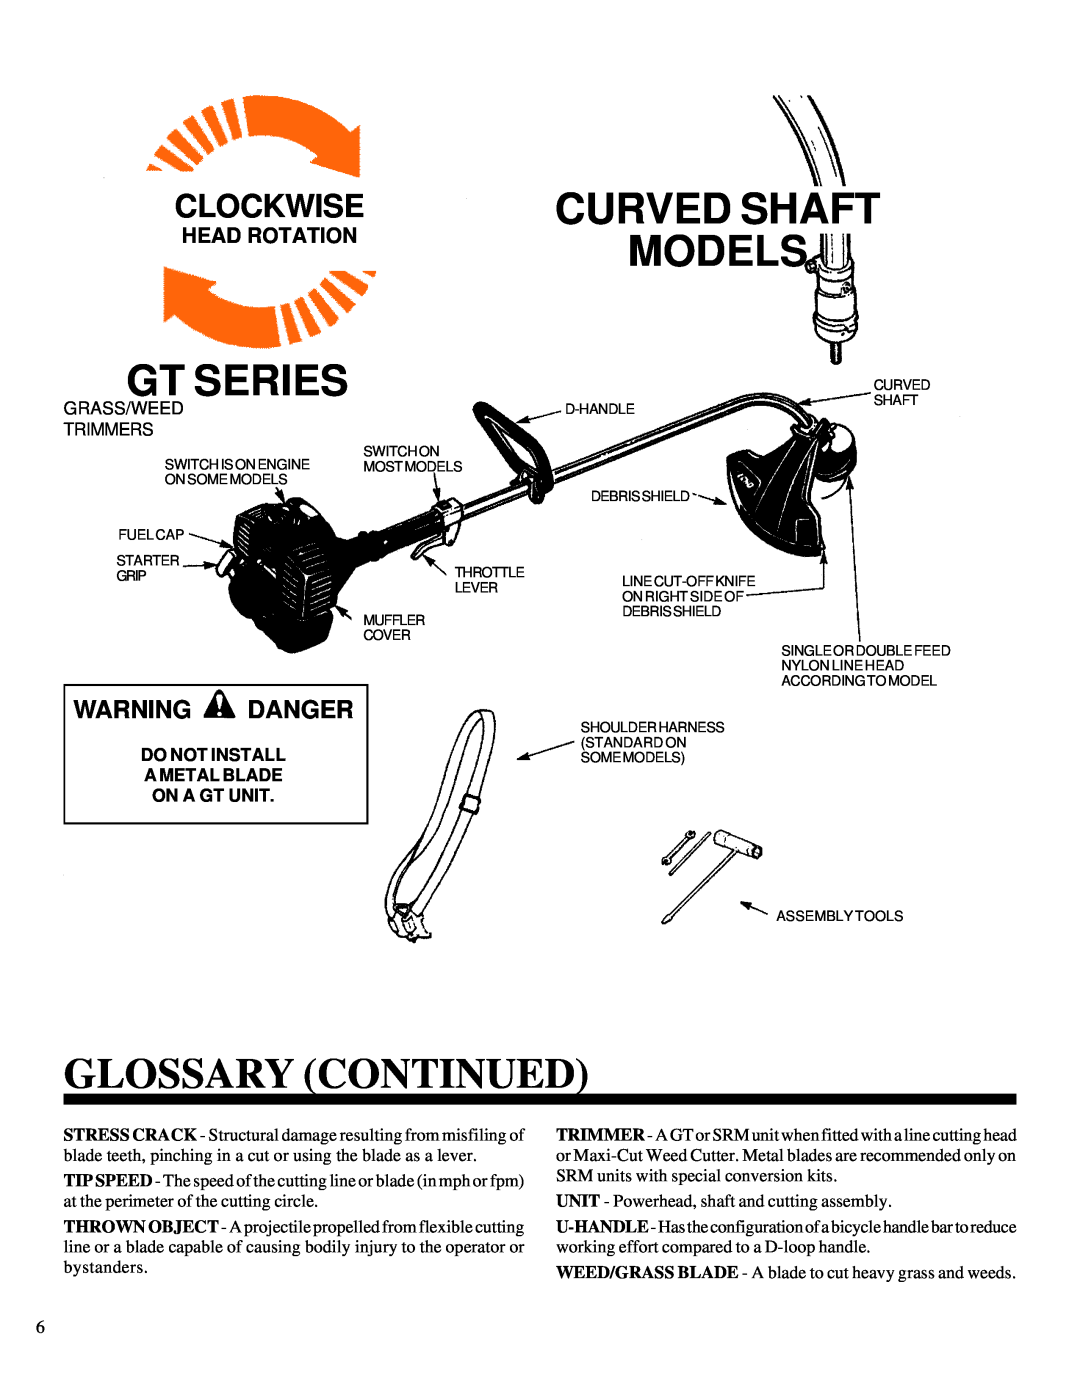 Echo GRASS/WEED TRIMMER BRUSHCUTTER and CLEARING SAW manual Curved Shaft Models, Gt Series, Glossary Continued, Clockwise 